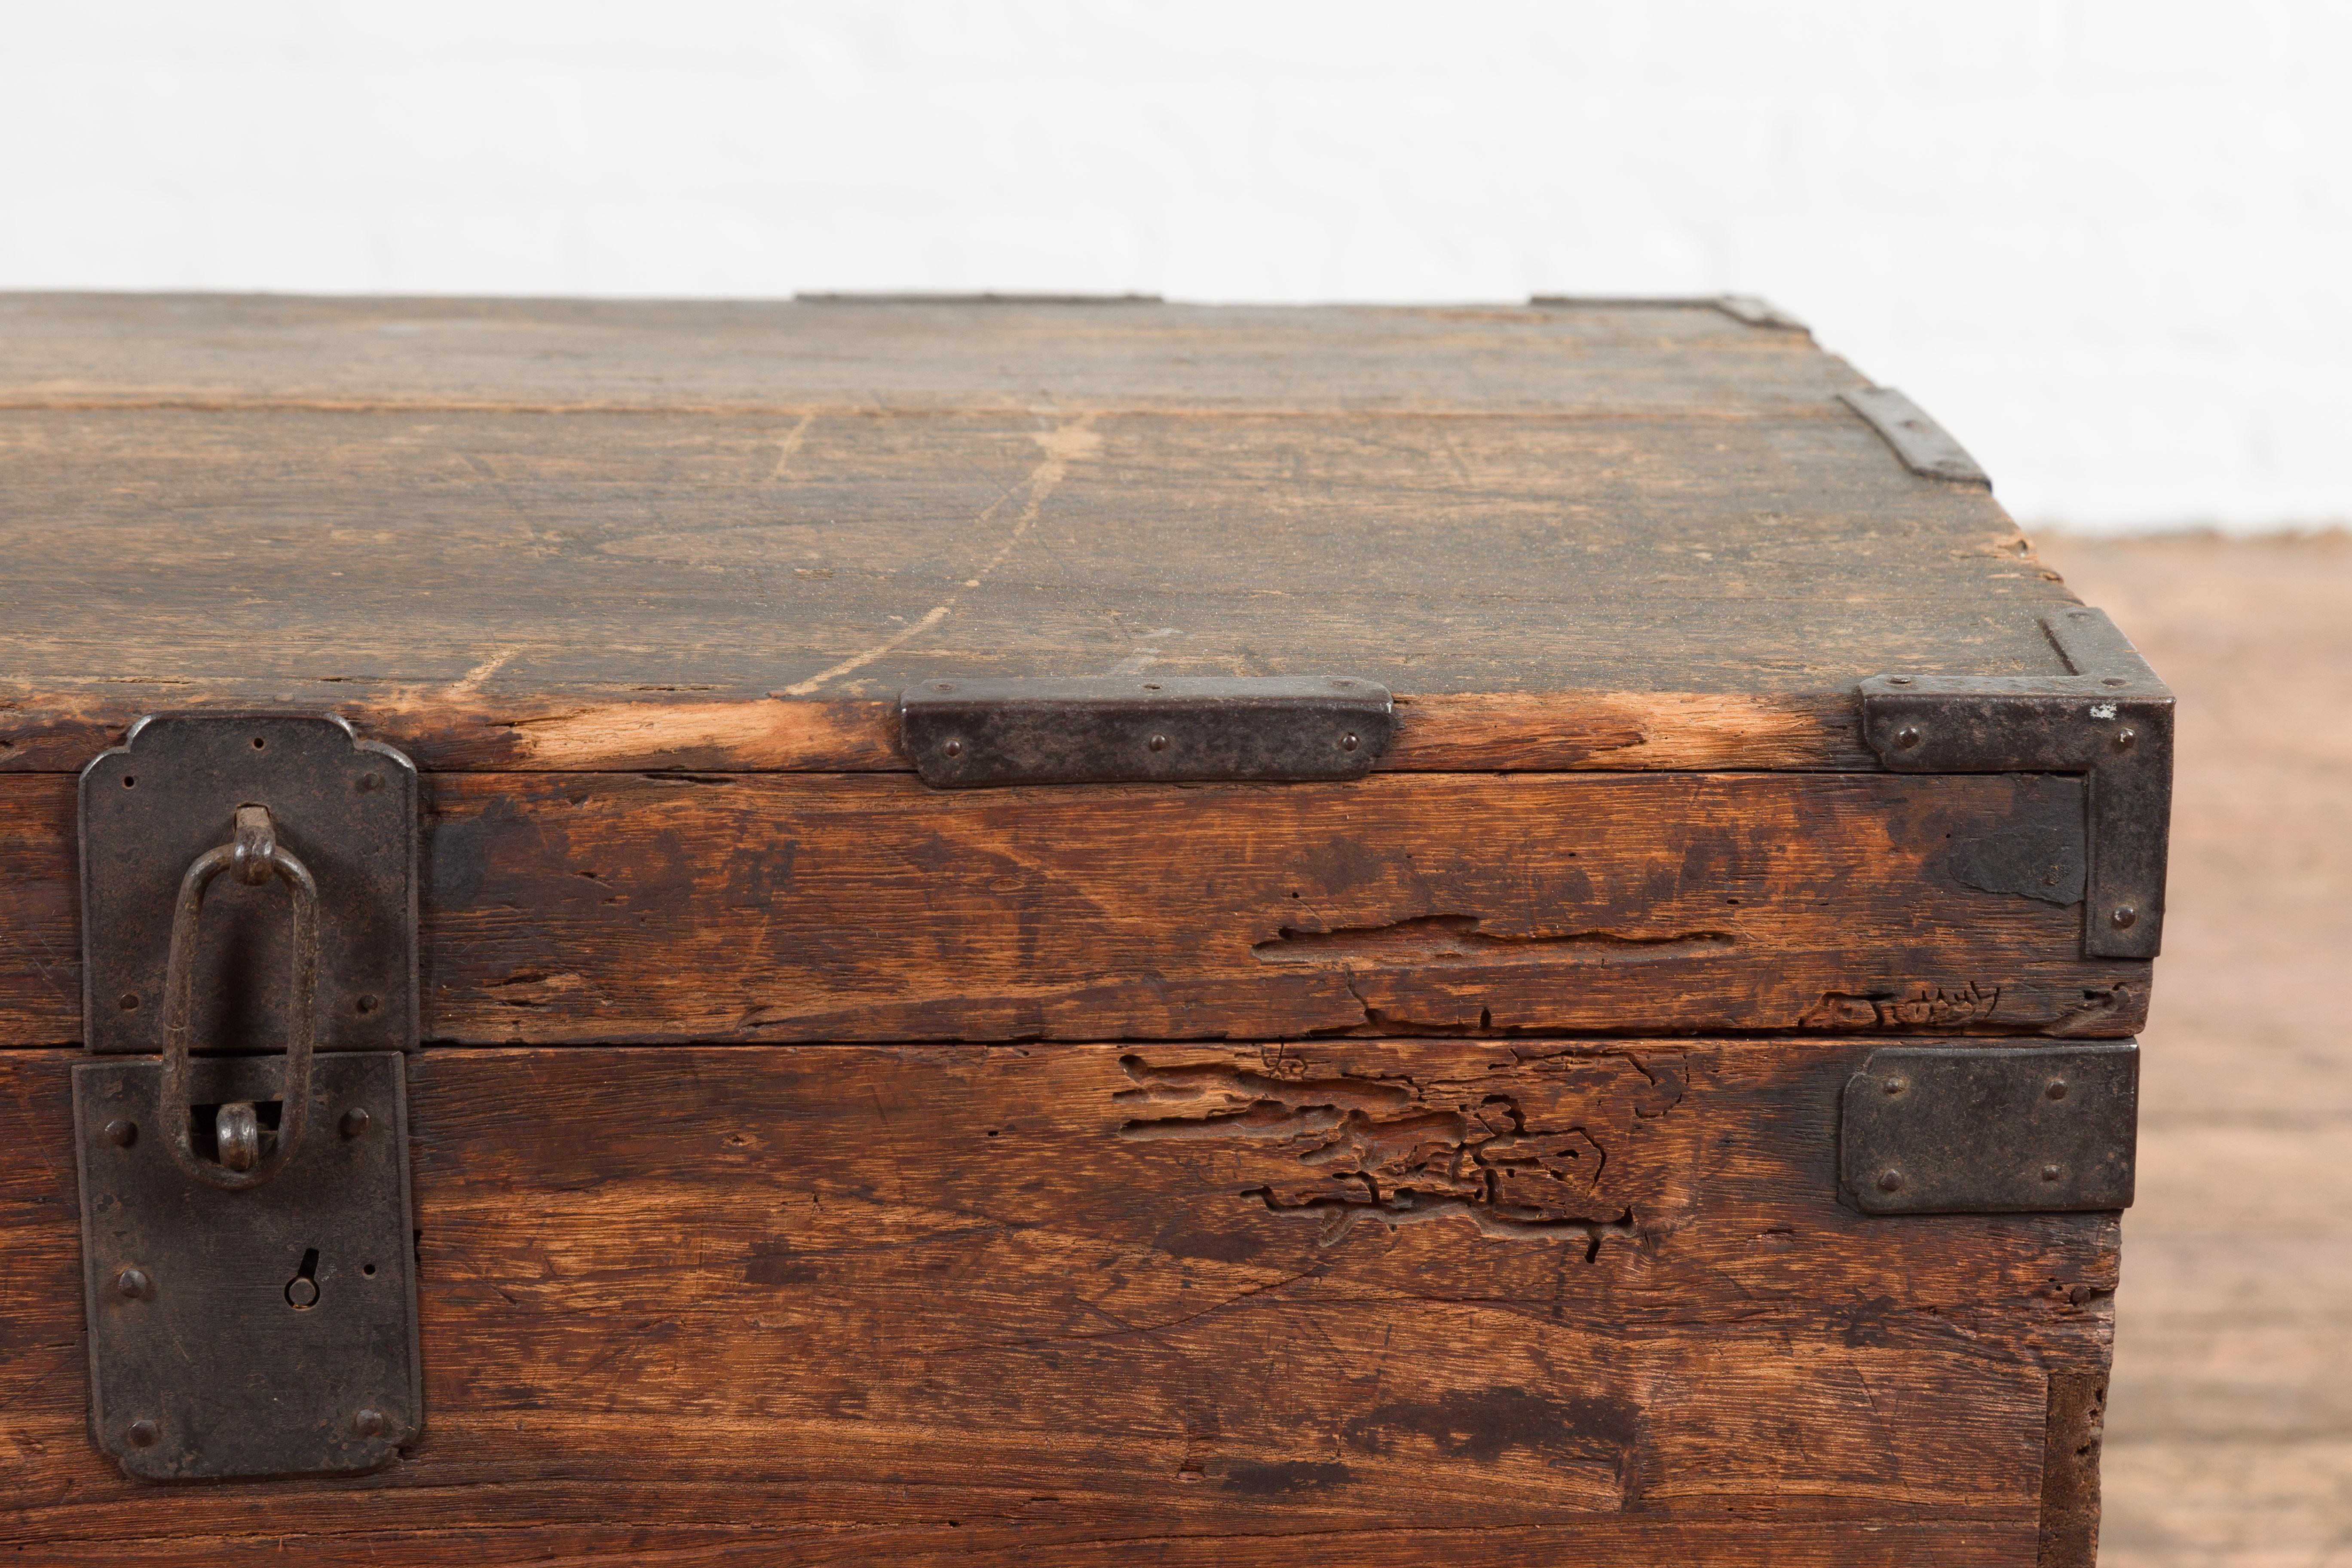 Japanese Meiji Period 19th Century Blanket Chest with Iron Hardware and Patina For Sale 5